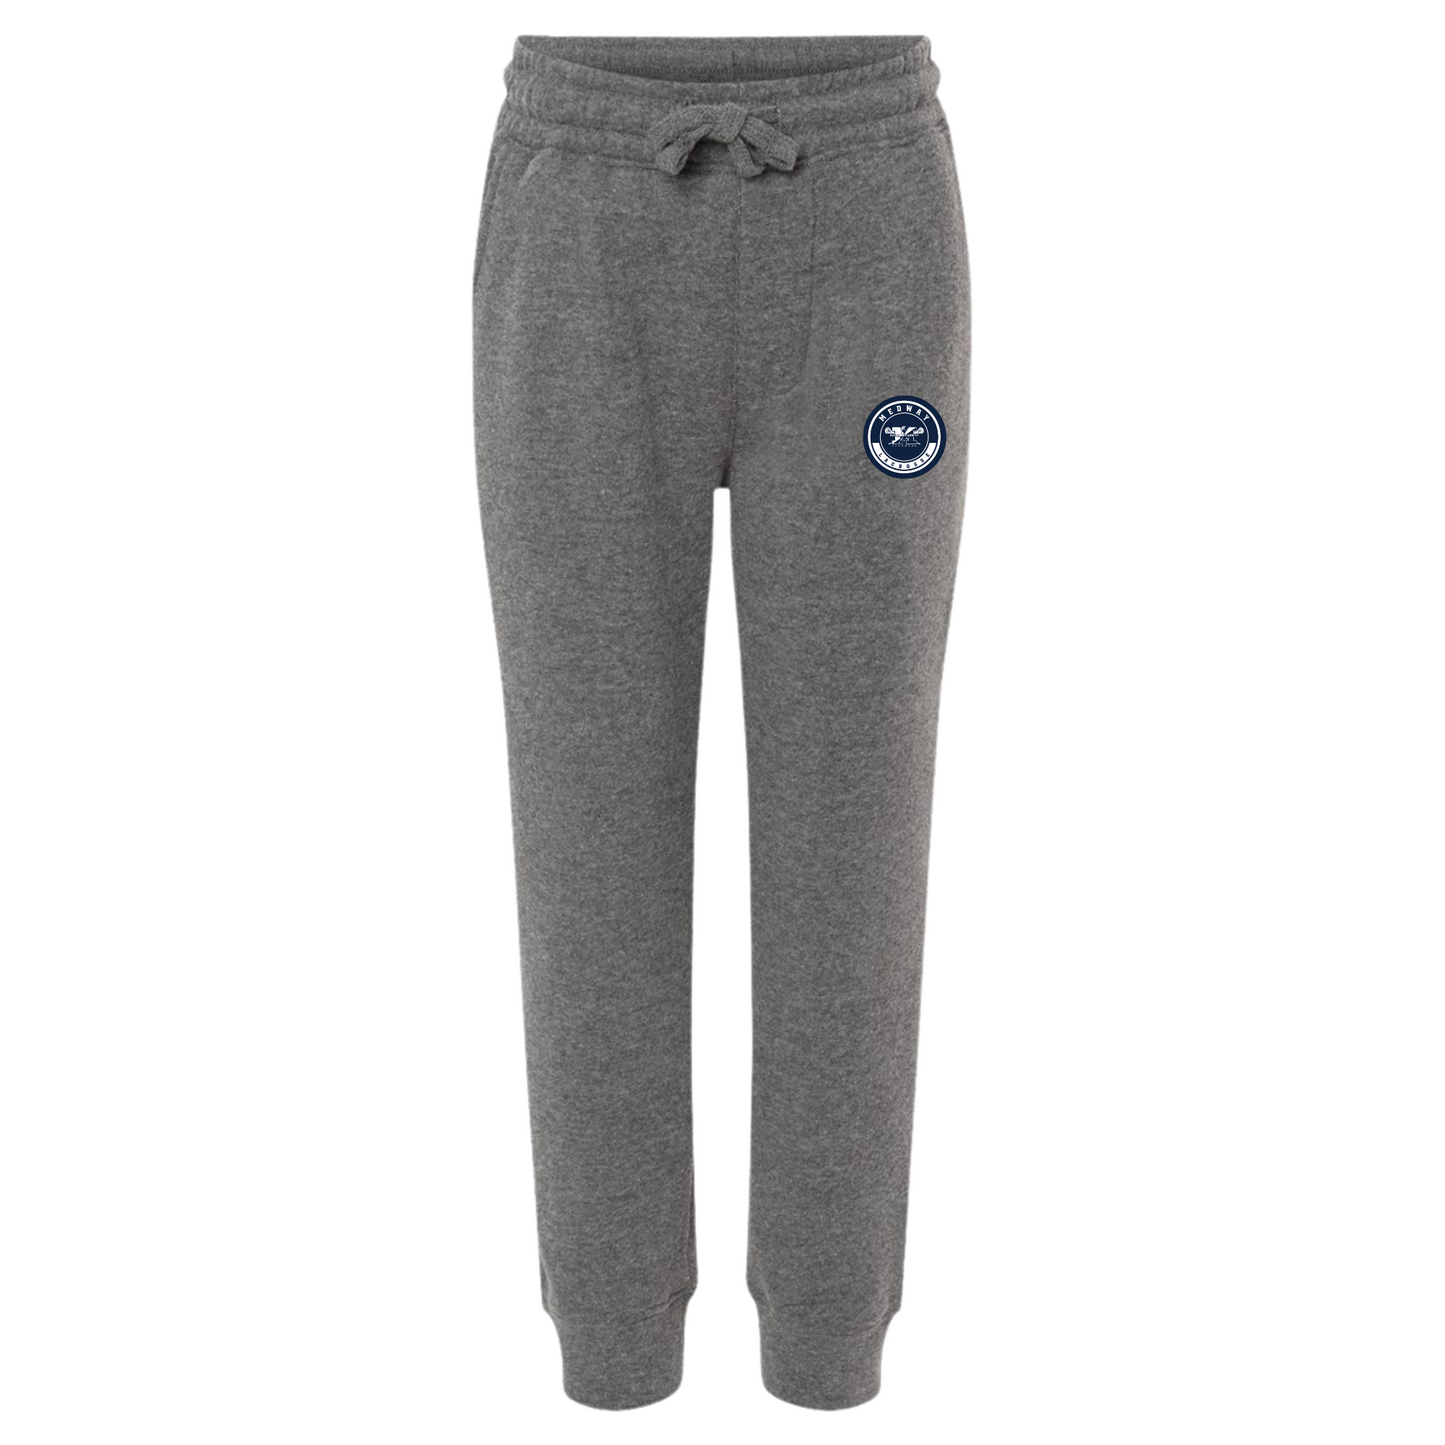 MEDWAY YOUTH LACROSSE YOUTH JOGGERS - NICKEL